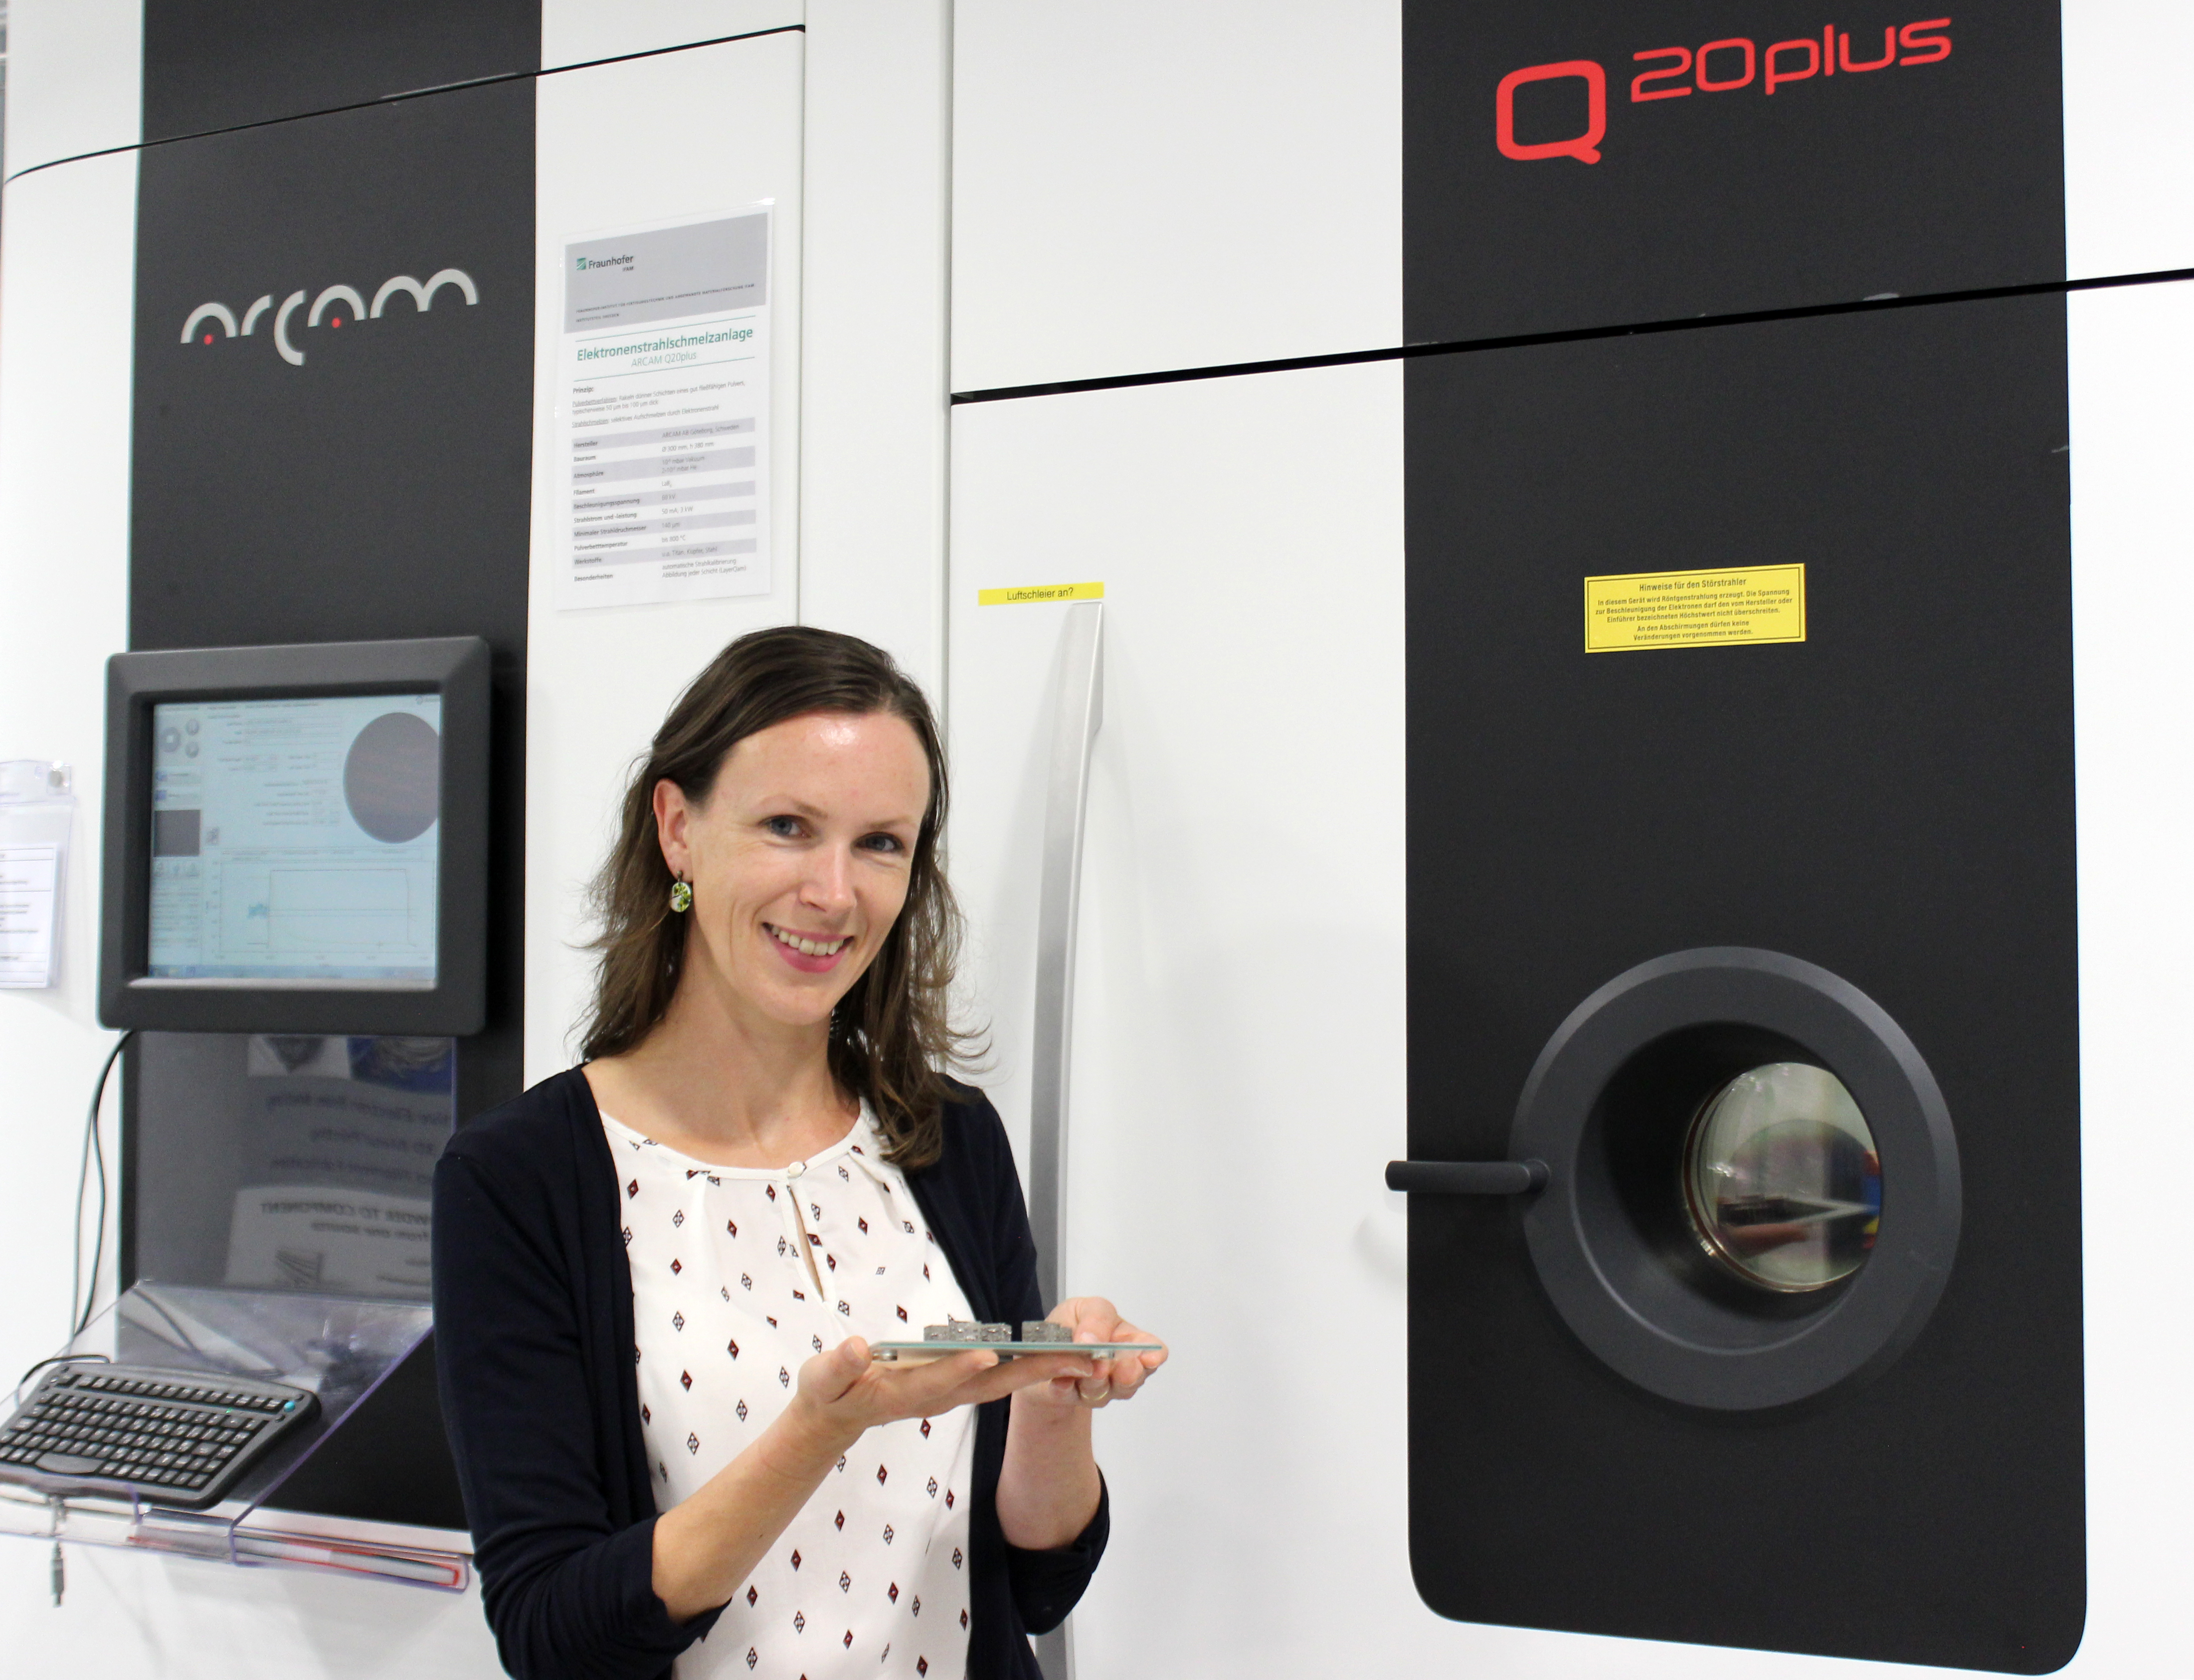 For her research work, Dr. Lindemann will work, among others, at the facilities for additive manufacturing at Fraunhofer IFAM in Dresden.